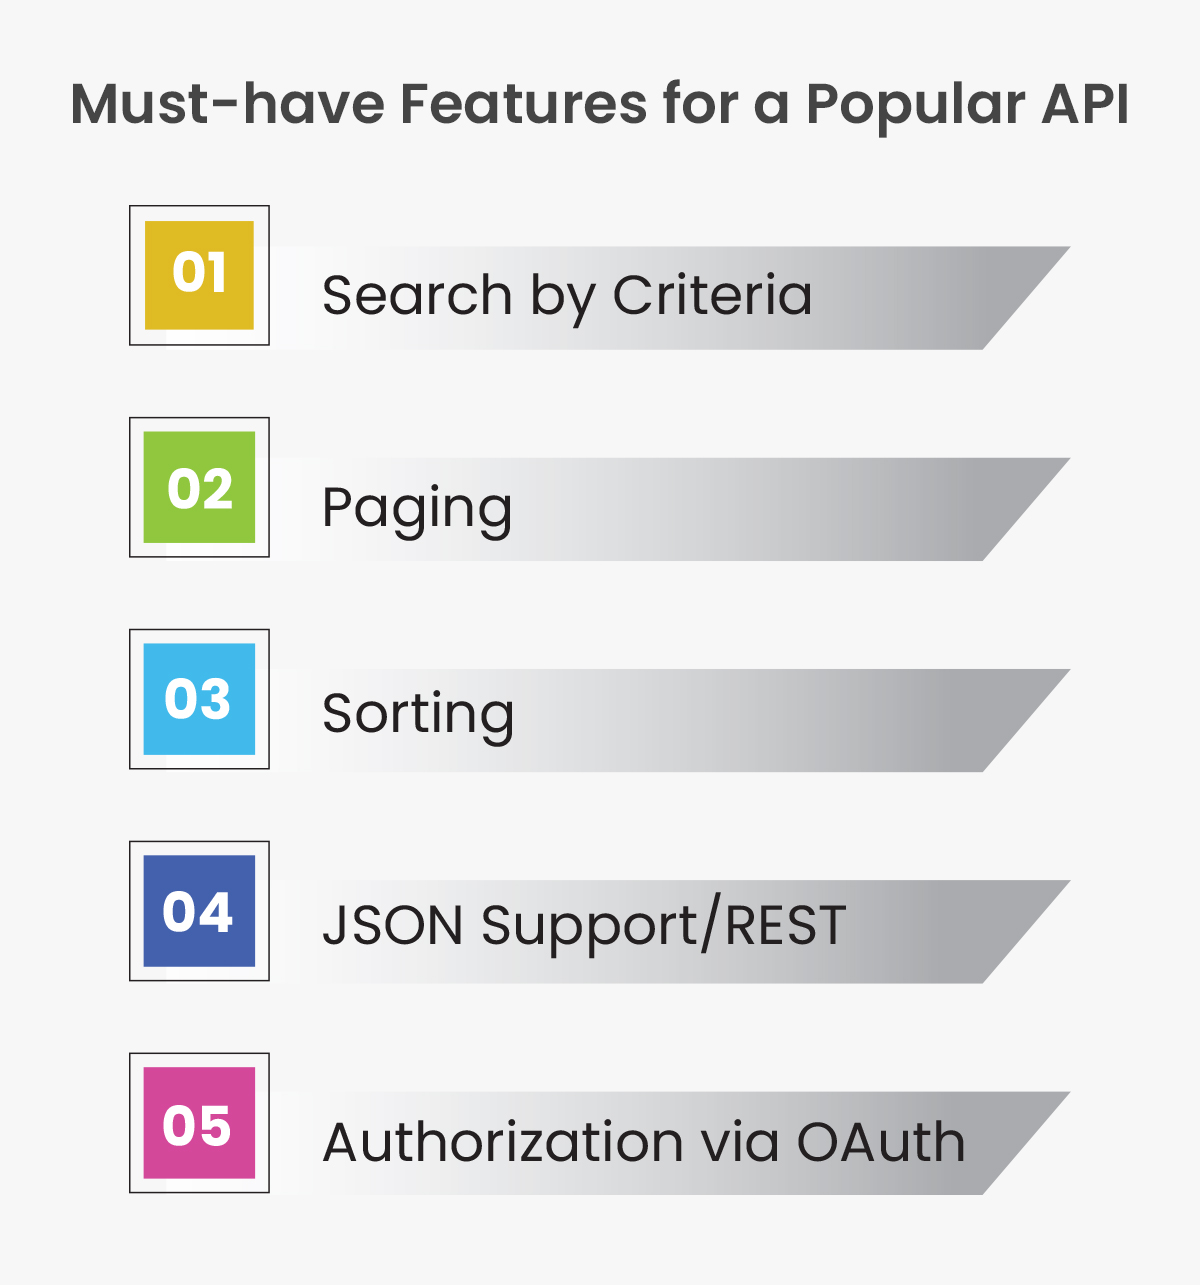 Must-have Features for a Popular API